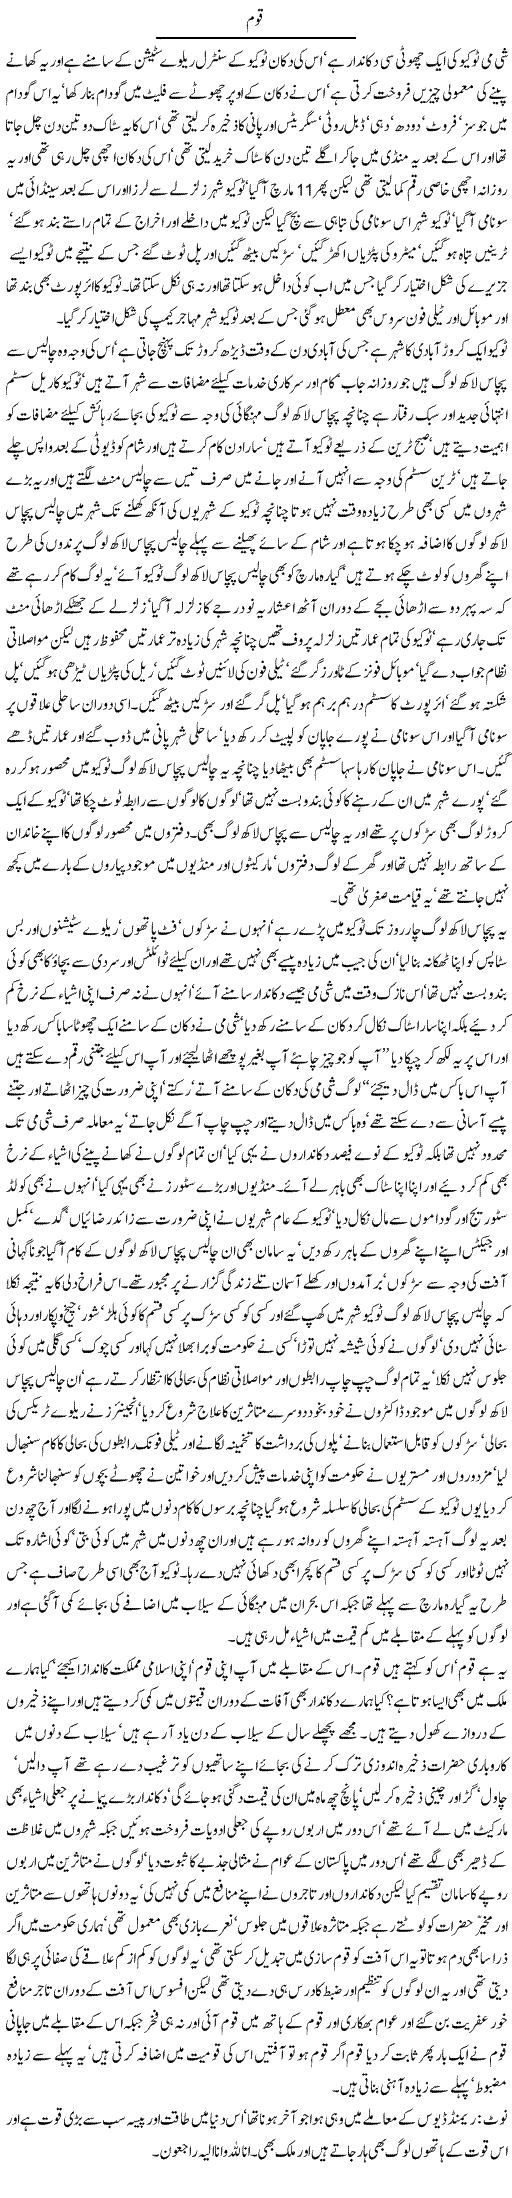 Japanese Nation Express Column Javed Chaudhry 17 March 2011